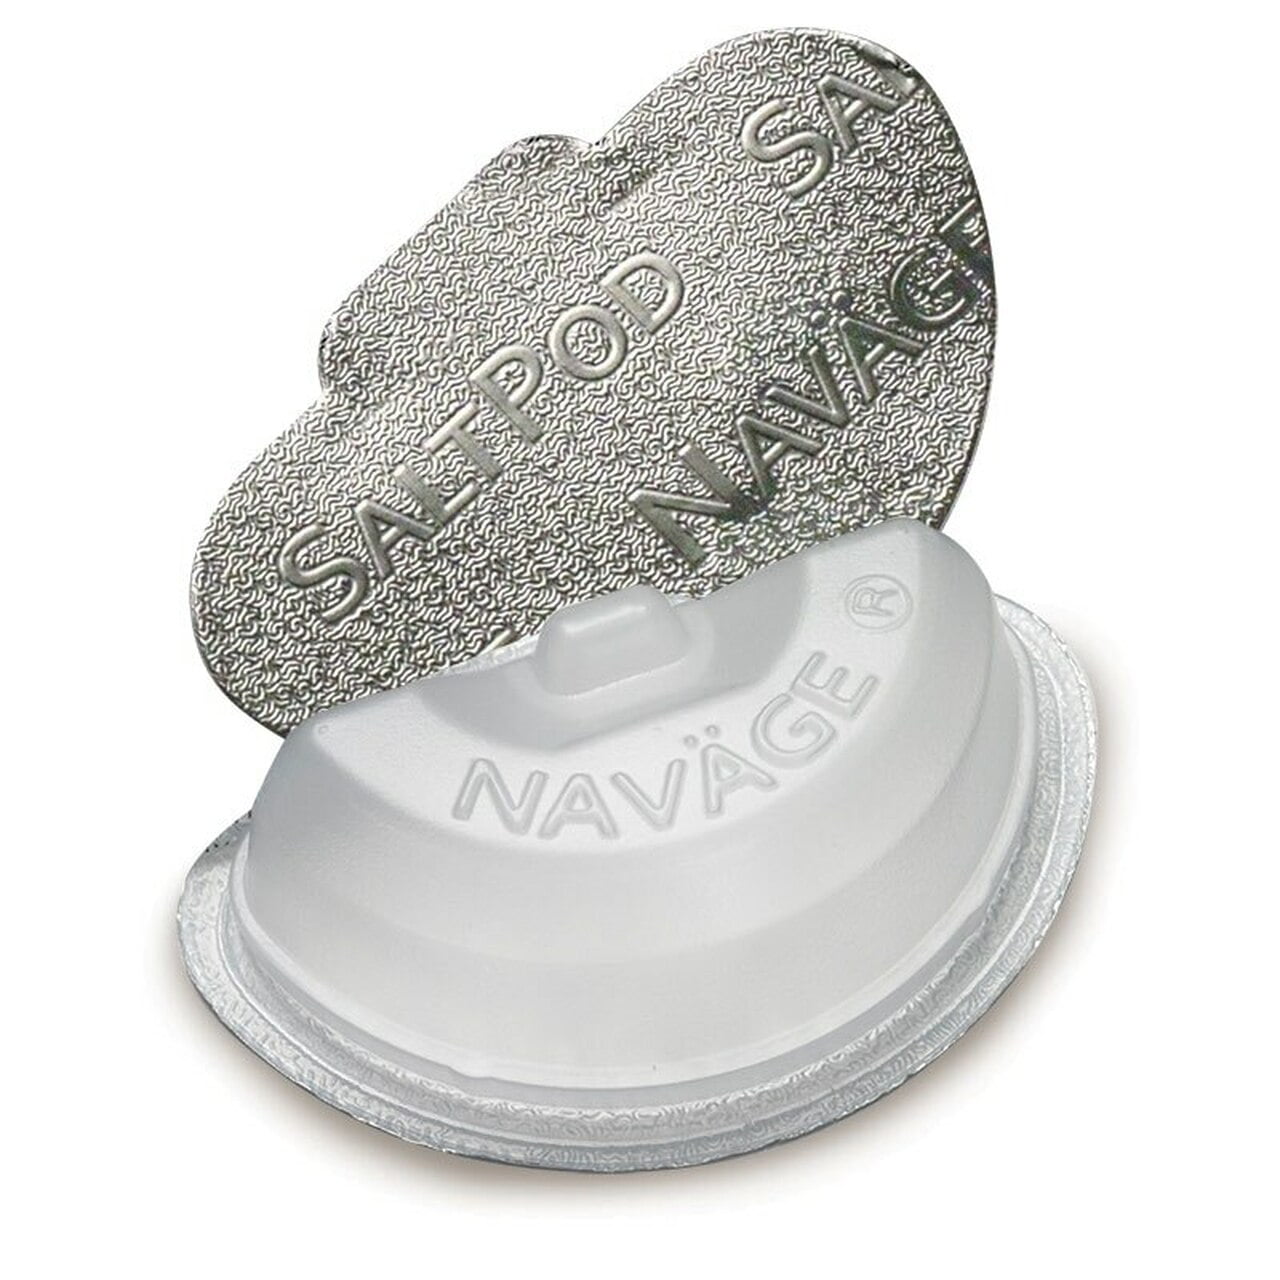 Navage Nasal Care Deluxe Bundle: Navage Nose Cleaner with 20 SaltPods,  Countertop Caddy, and Travel Bag. 142.85 if Purchased Separately. Save  22.90.